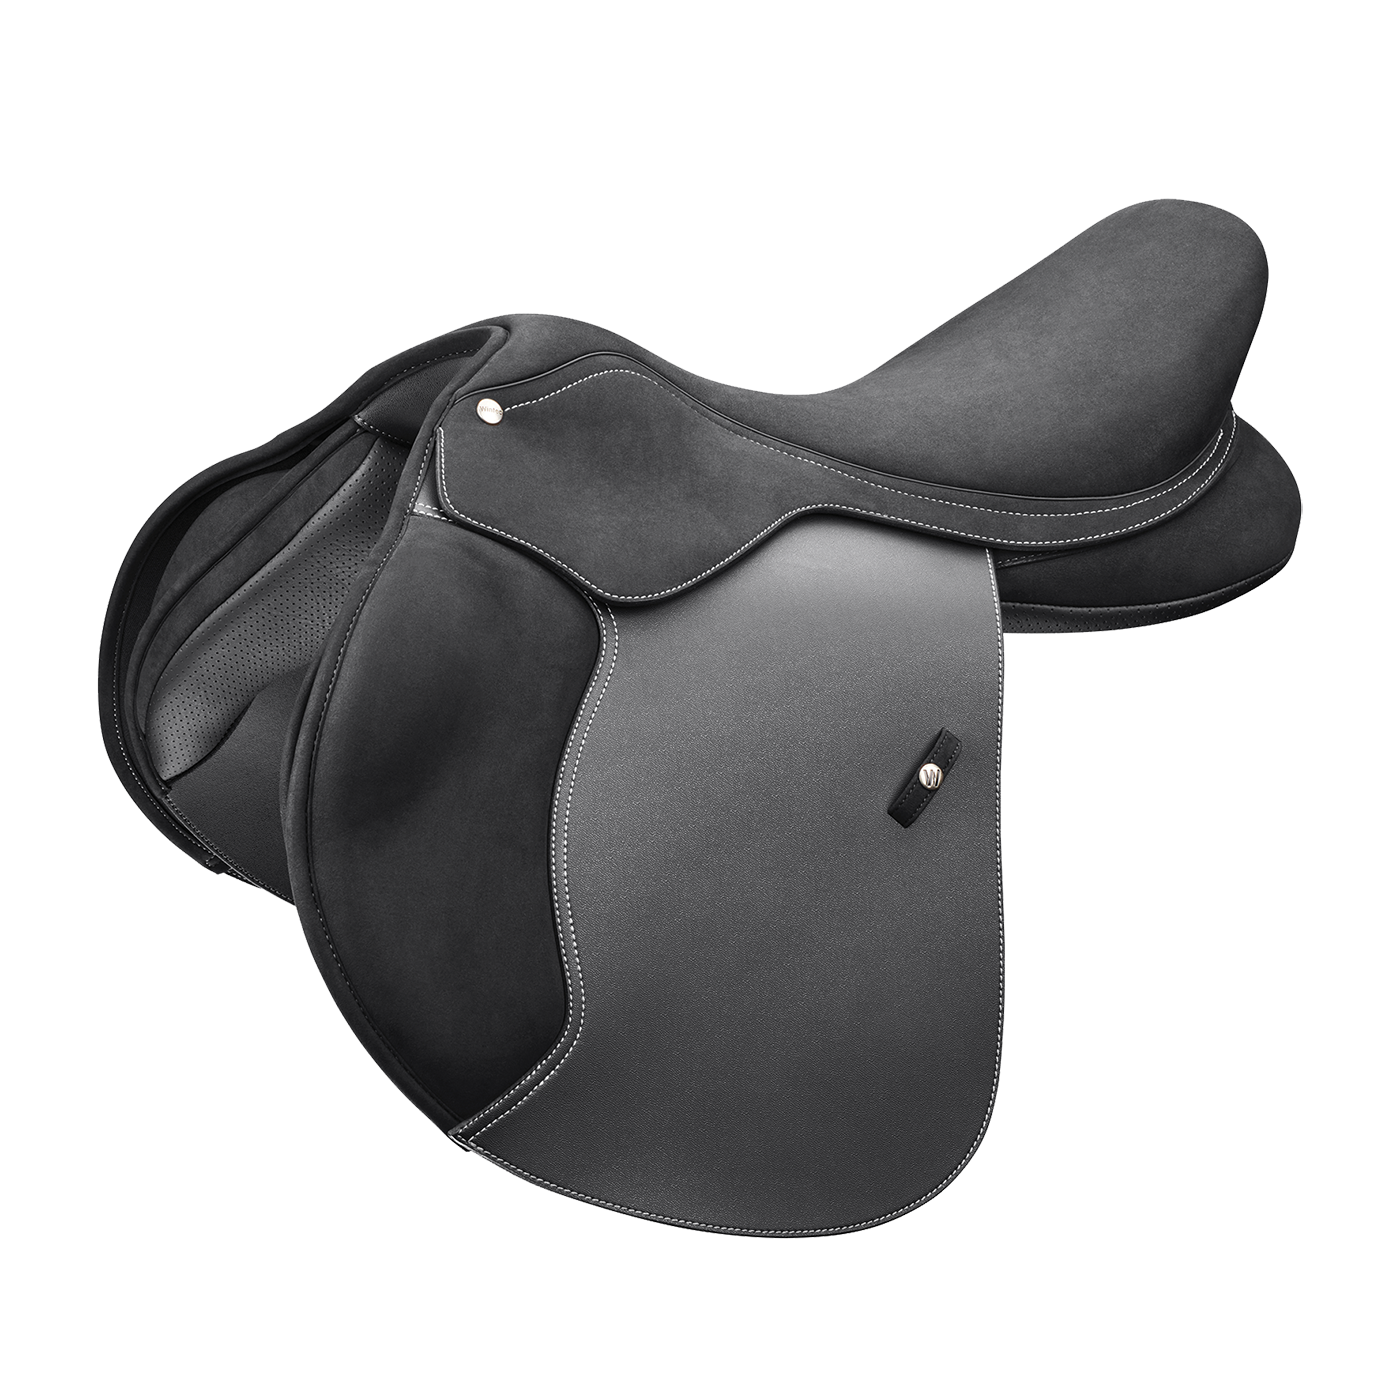 saddles and accessories – Wintec Saddles